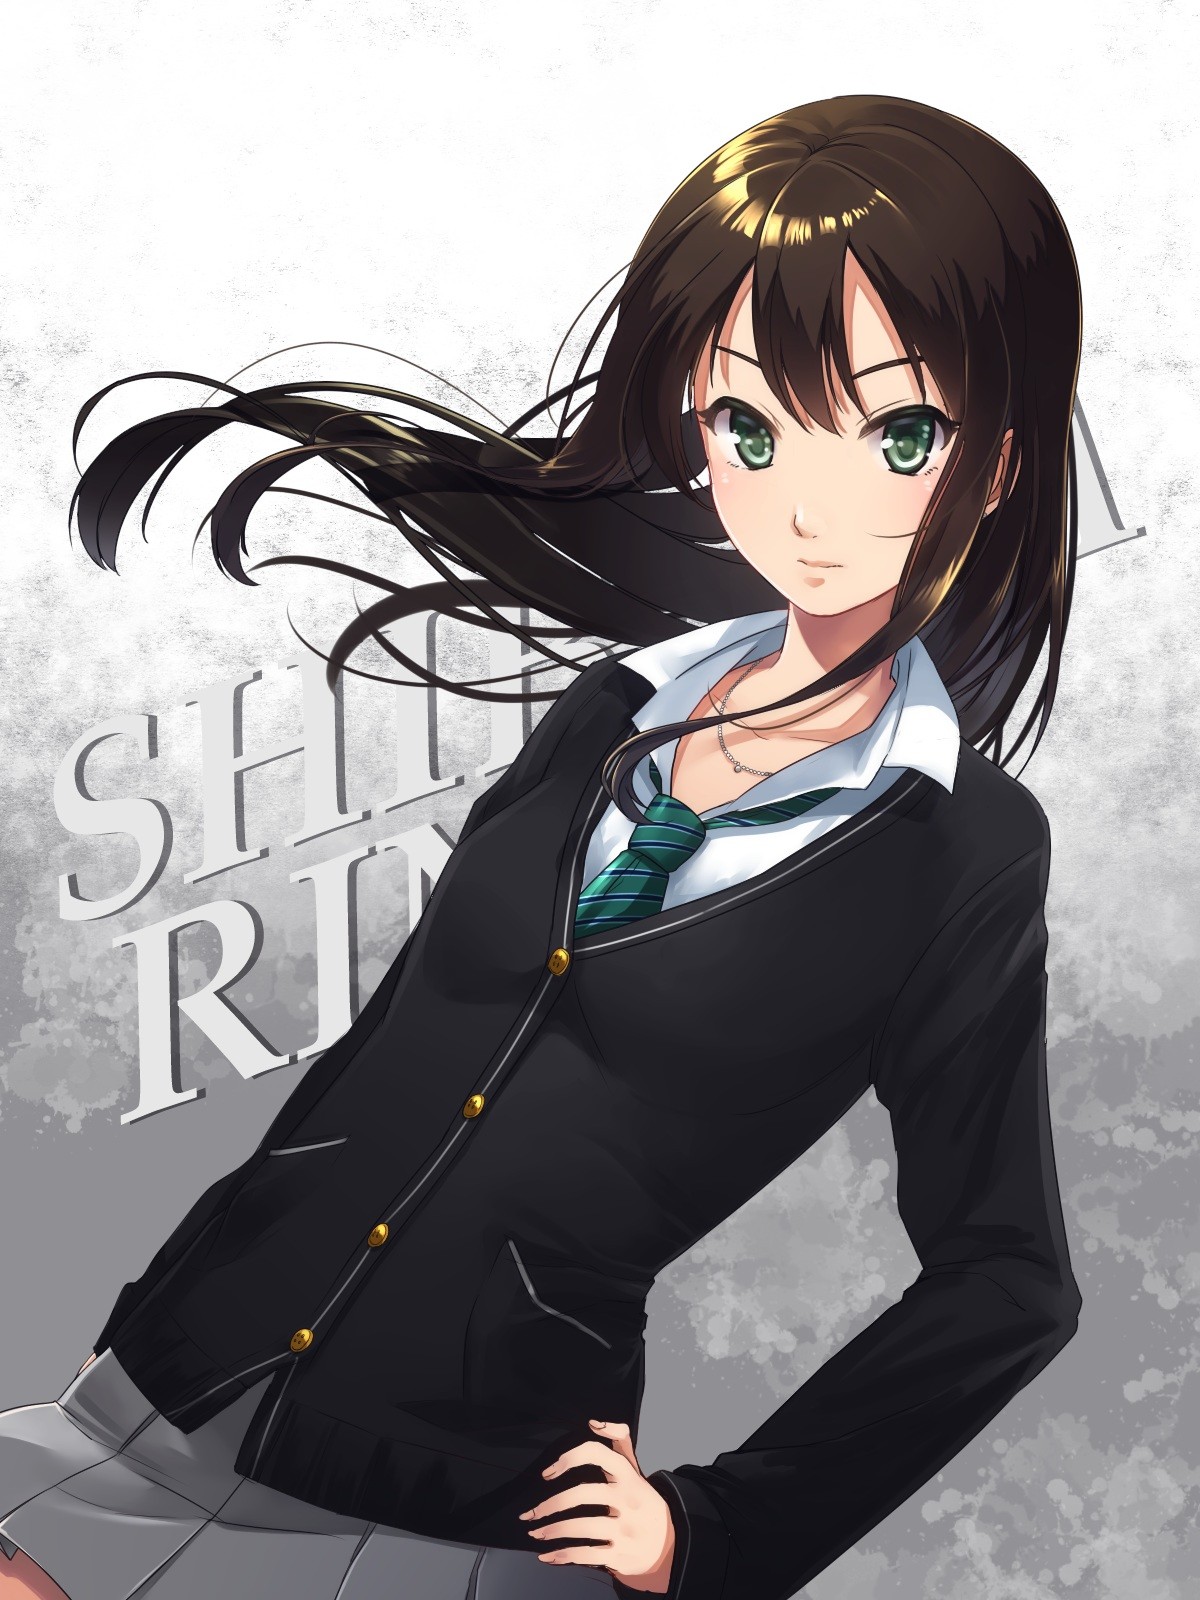 Anime 1200x1600 anime anime girls Shibuya Rin THE iDOLM@STER THE iDOLM@STER: Cinderella Girls sweater green eyes long hair women Pixiv tie skirt black clothing hair in face gray background simple background looking at viewer brunette